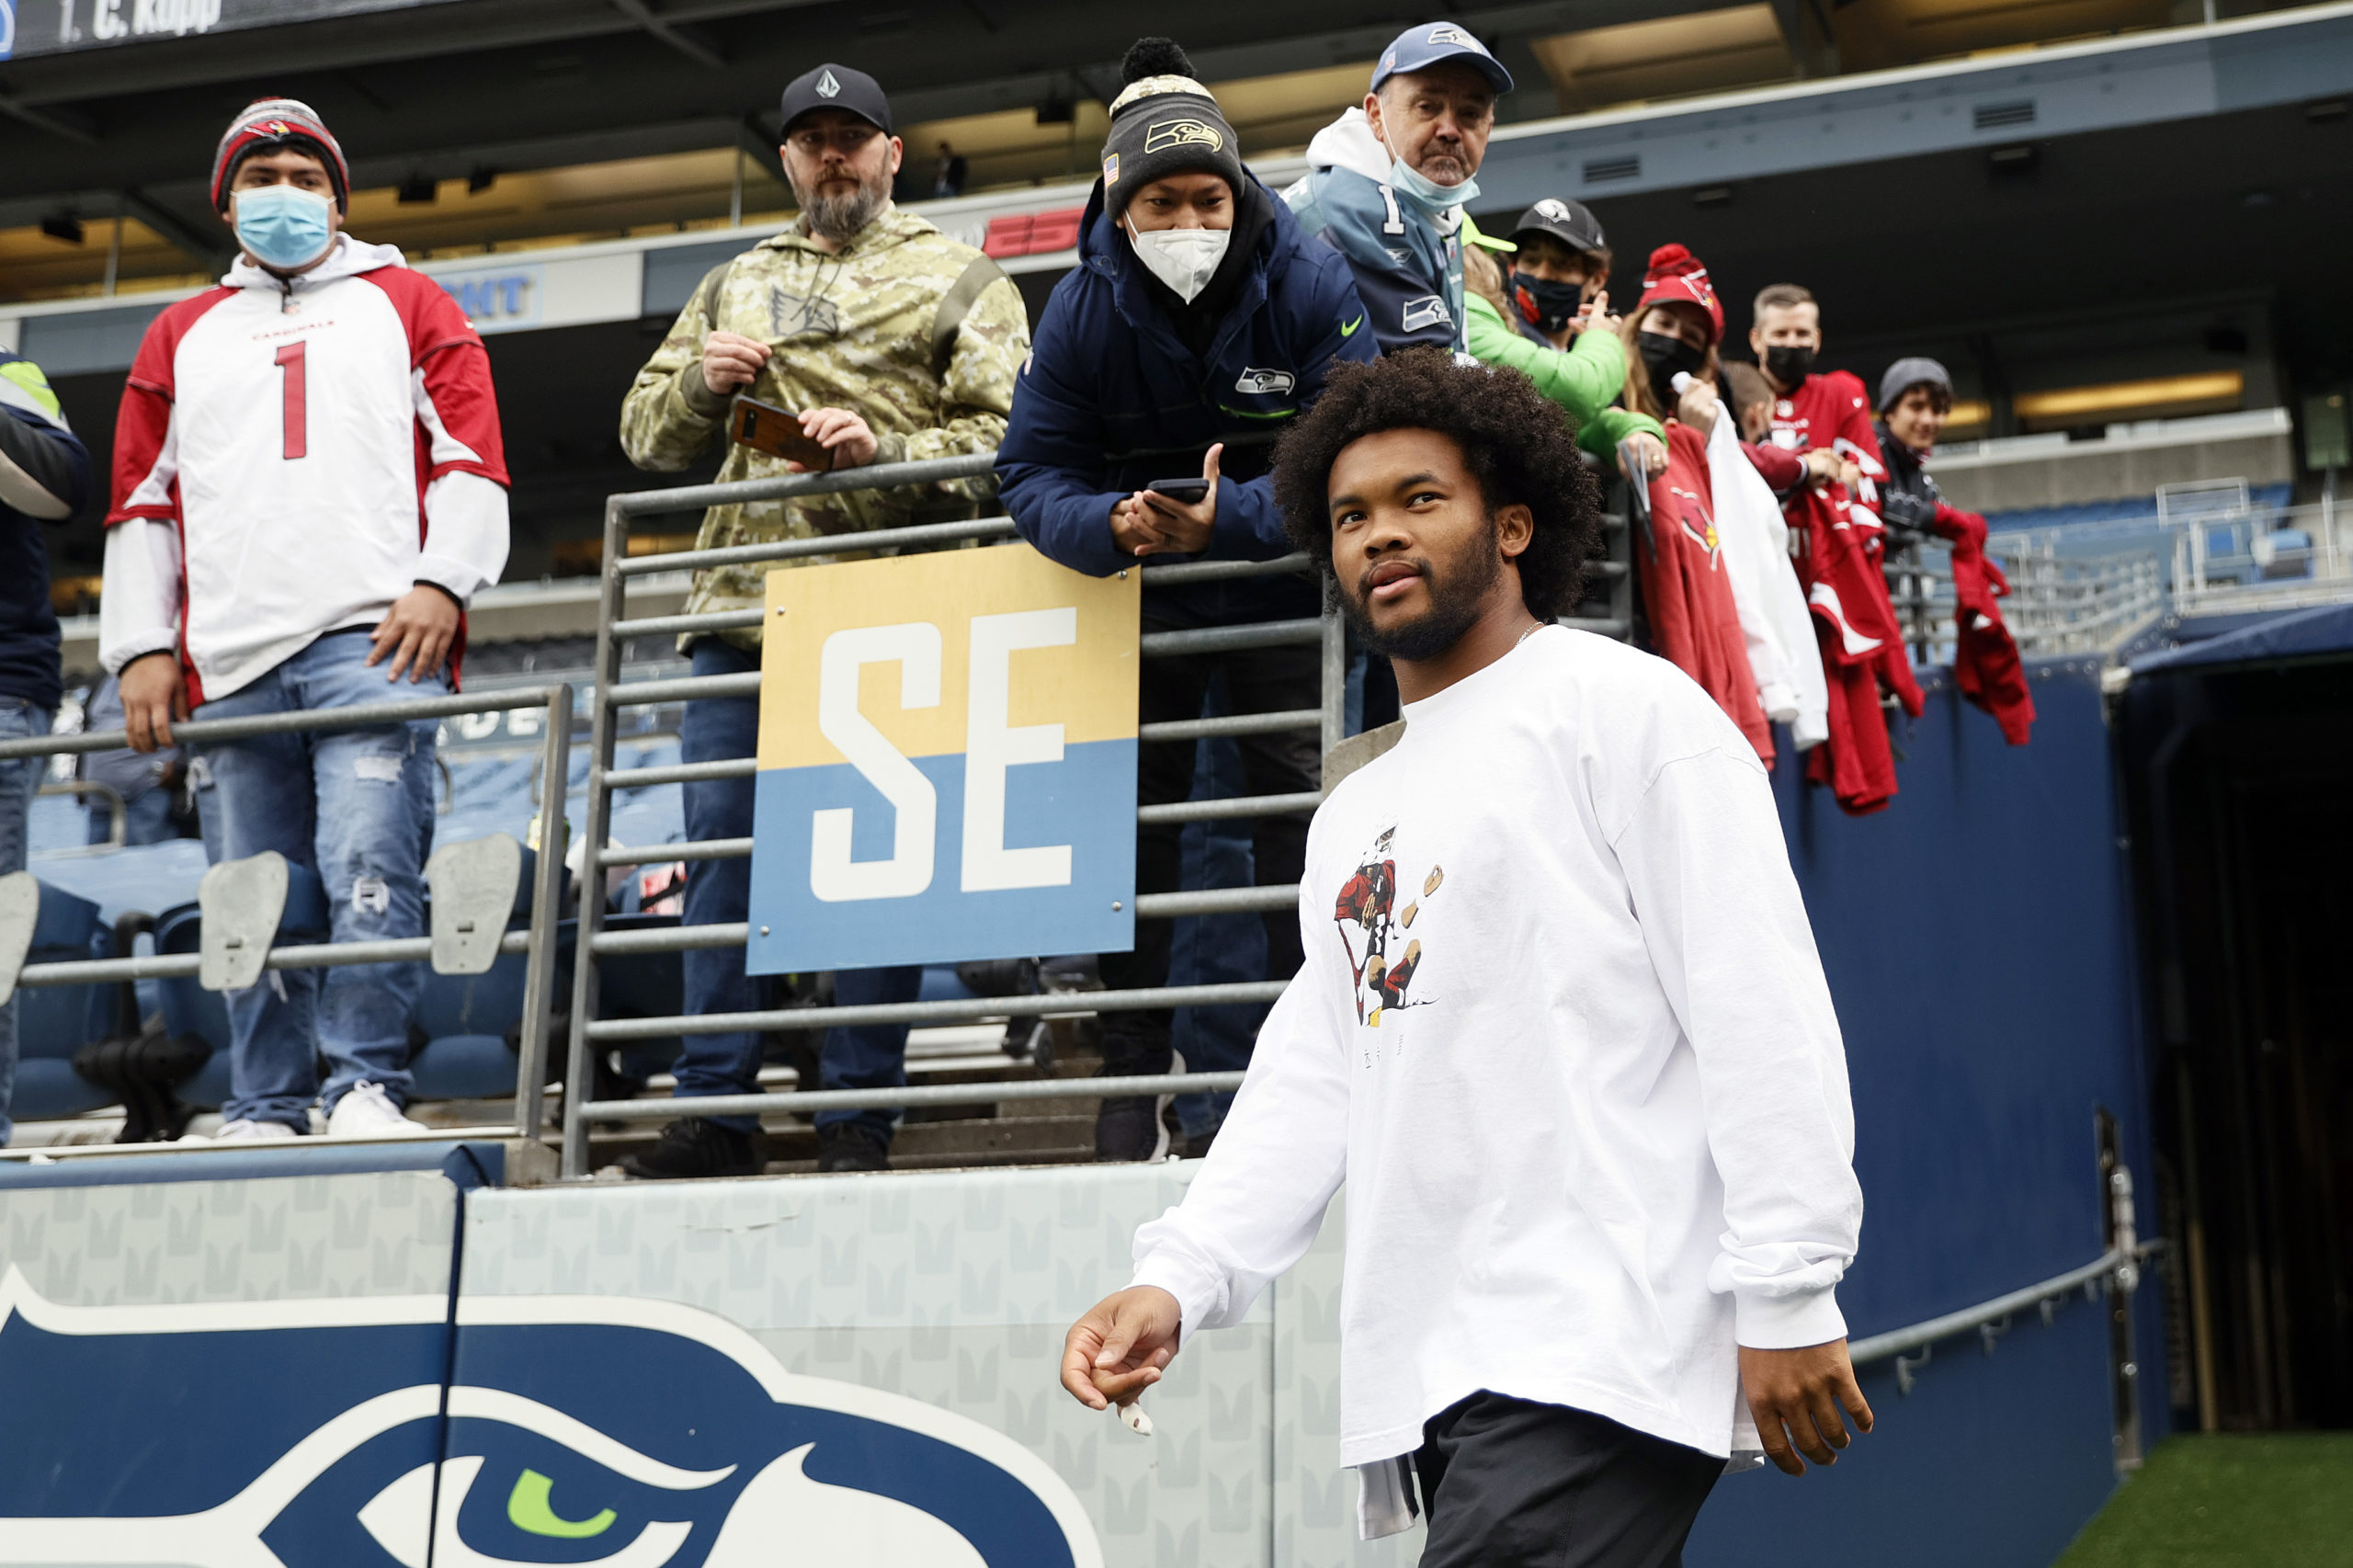 SEATTLE, WASHINGTON - NOVEMBER 21: Kyler Murray #1 of the Arizona Cardinals walks takes the field during pregame warm-ups before the game against the Seattle Seahawks at Lumen Field on November 21, 2021 in Seattle, Washington. (Photo by Steph Chambers/Getty Images)